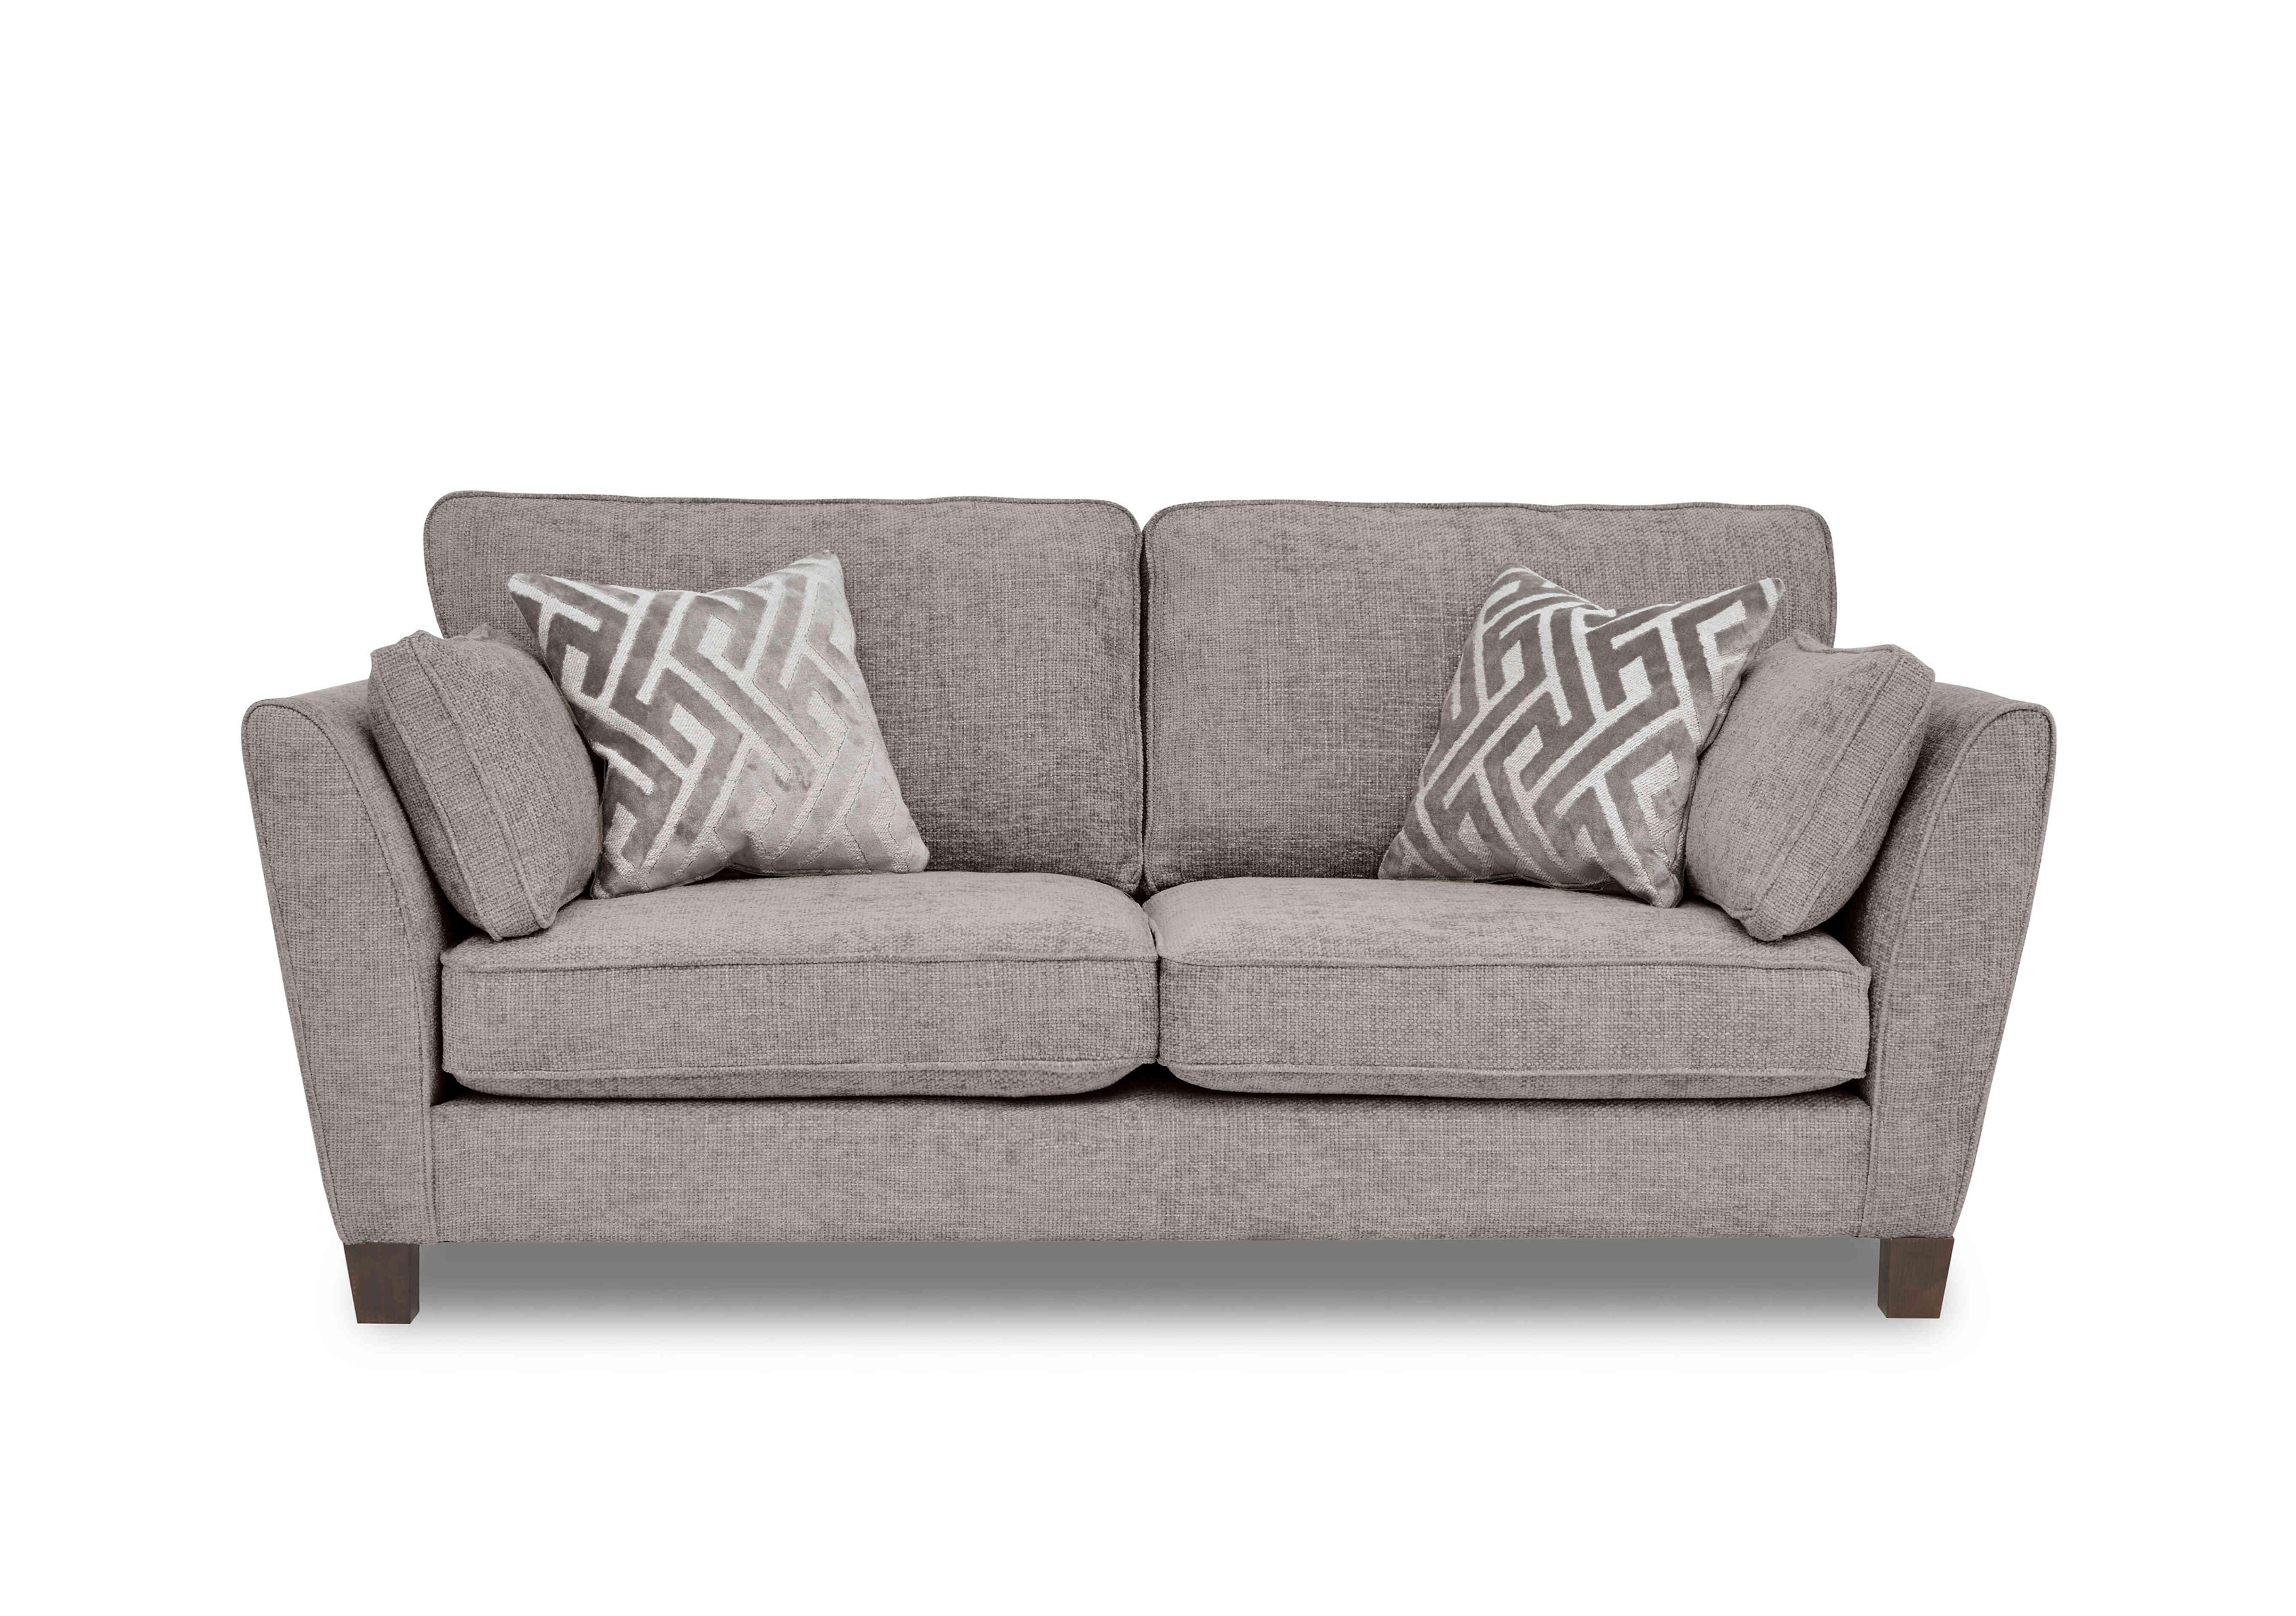 Tabitha 3 Seater Sofa in Ivory on Furniture Village